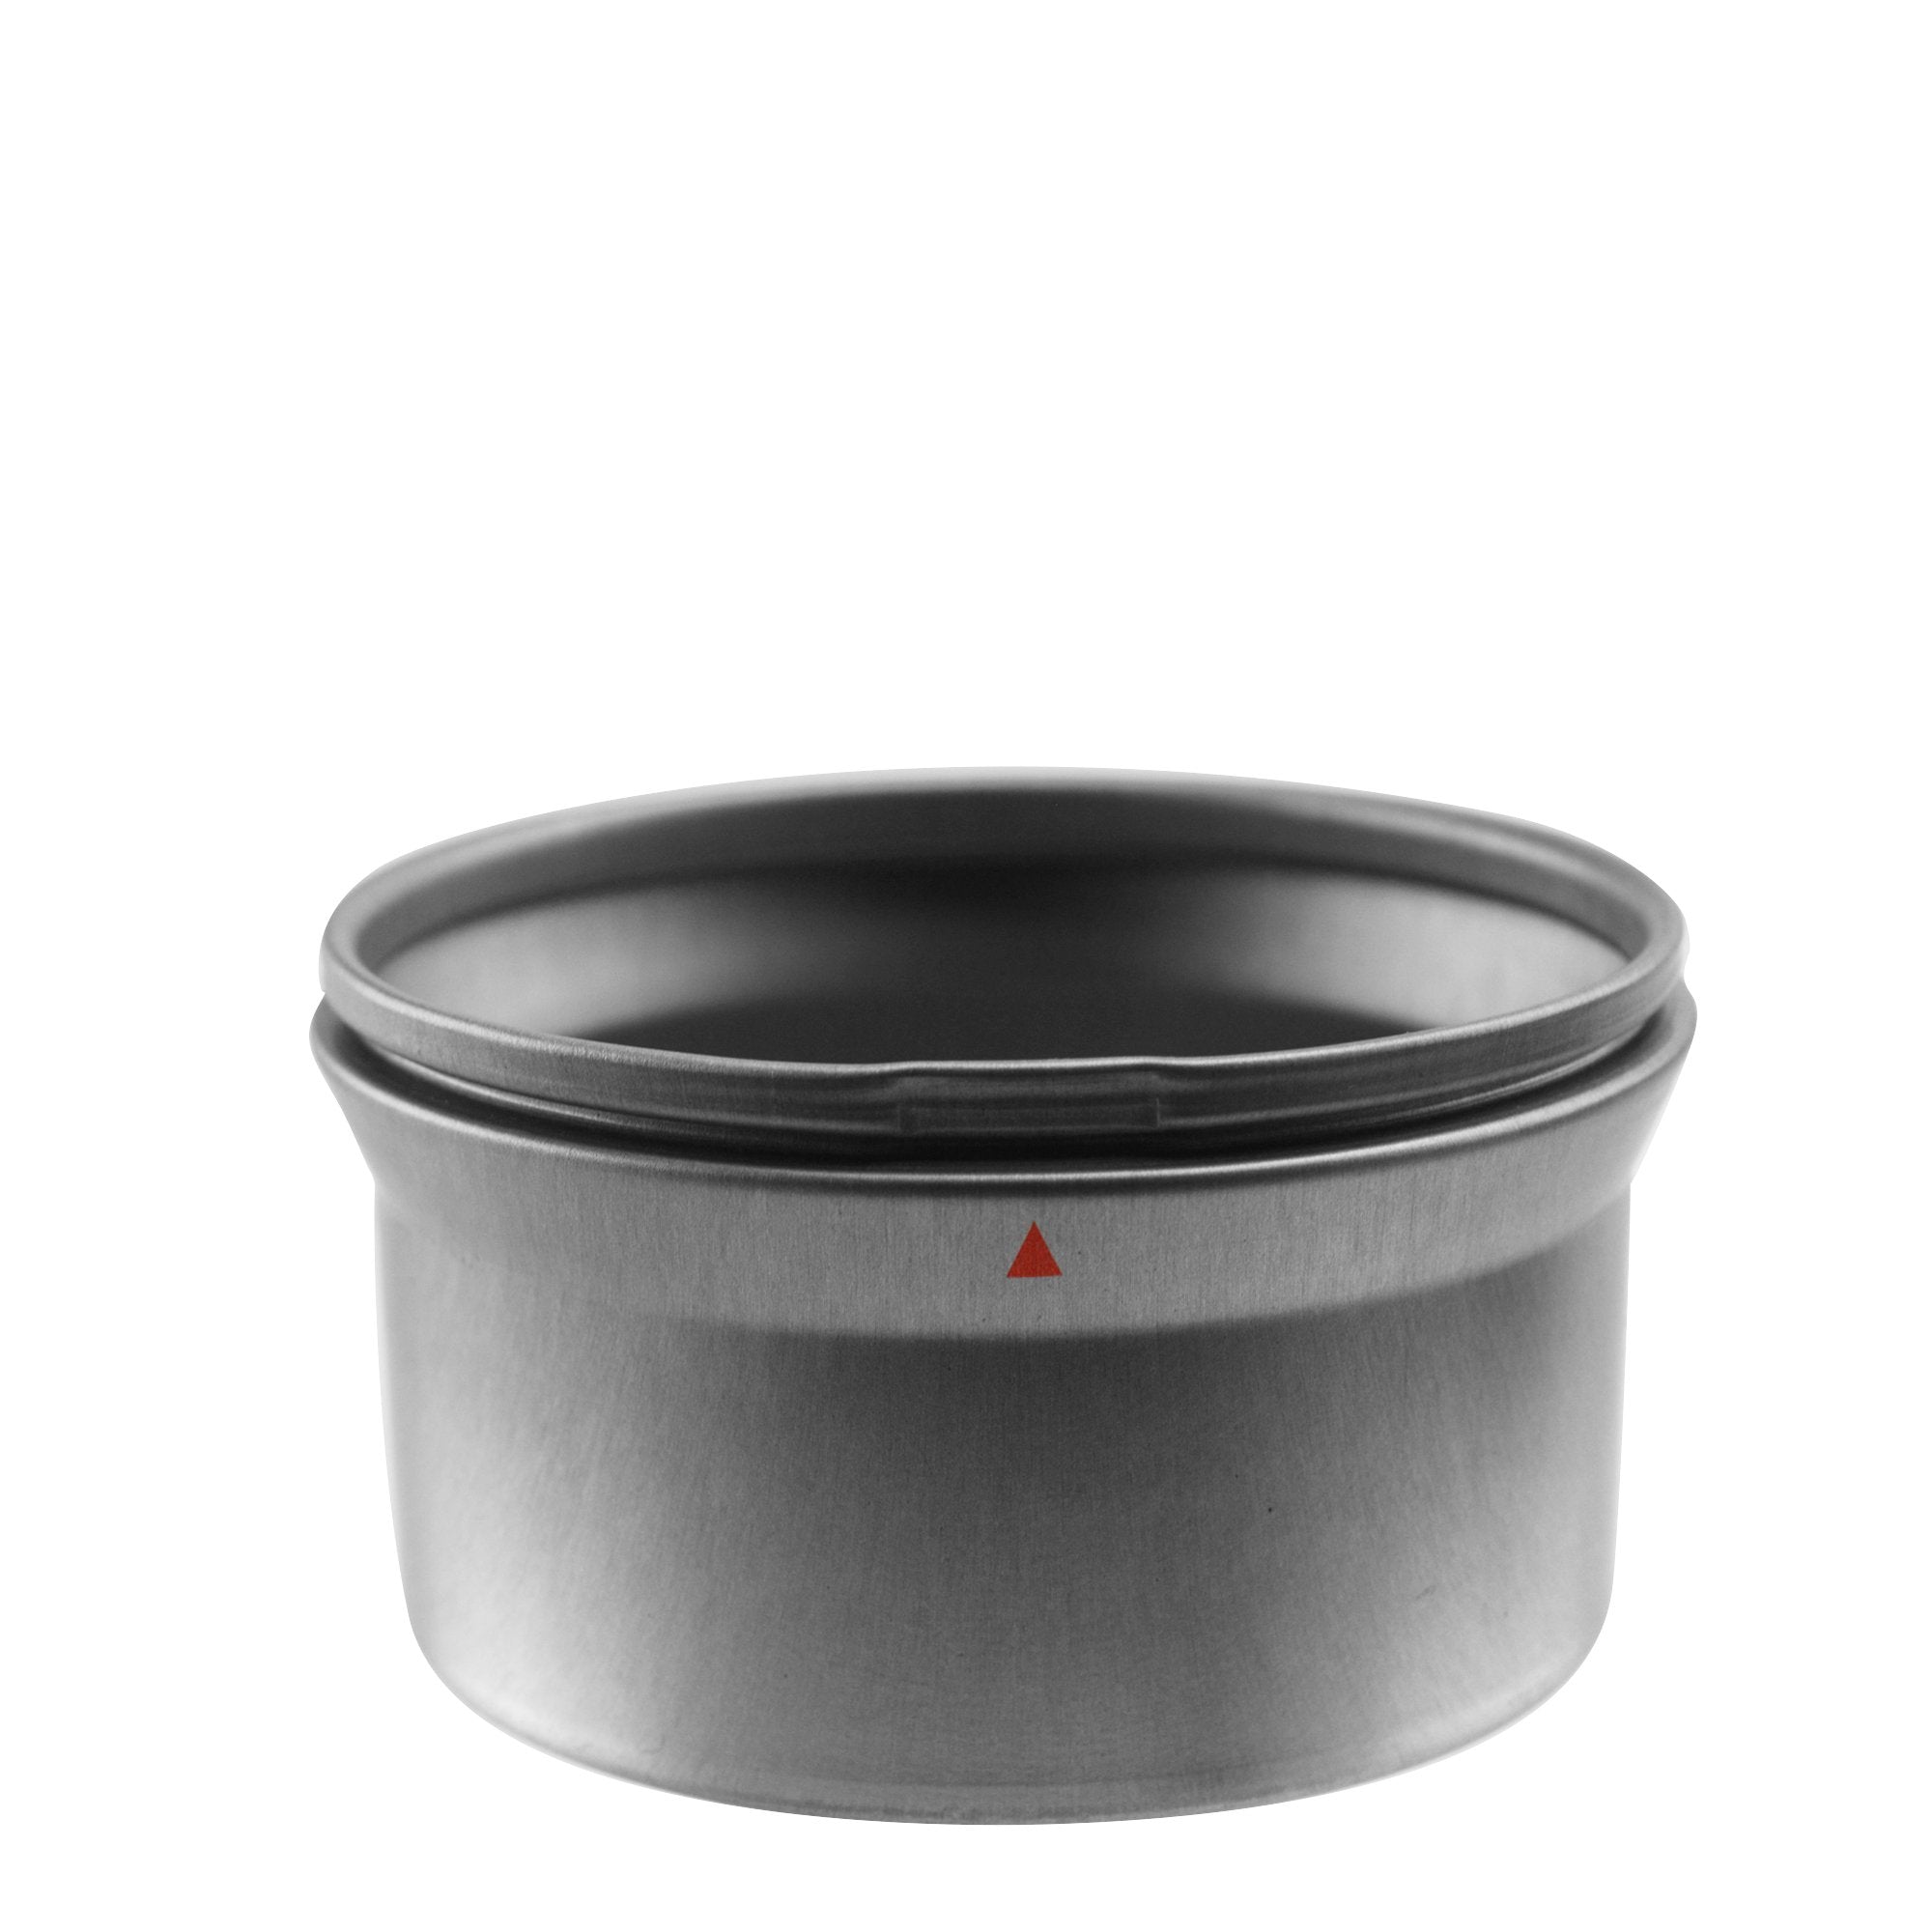 Child Resistant | Safely Lock Sentinel Child Resistant Tin with Cap - 6